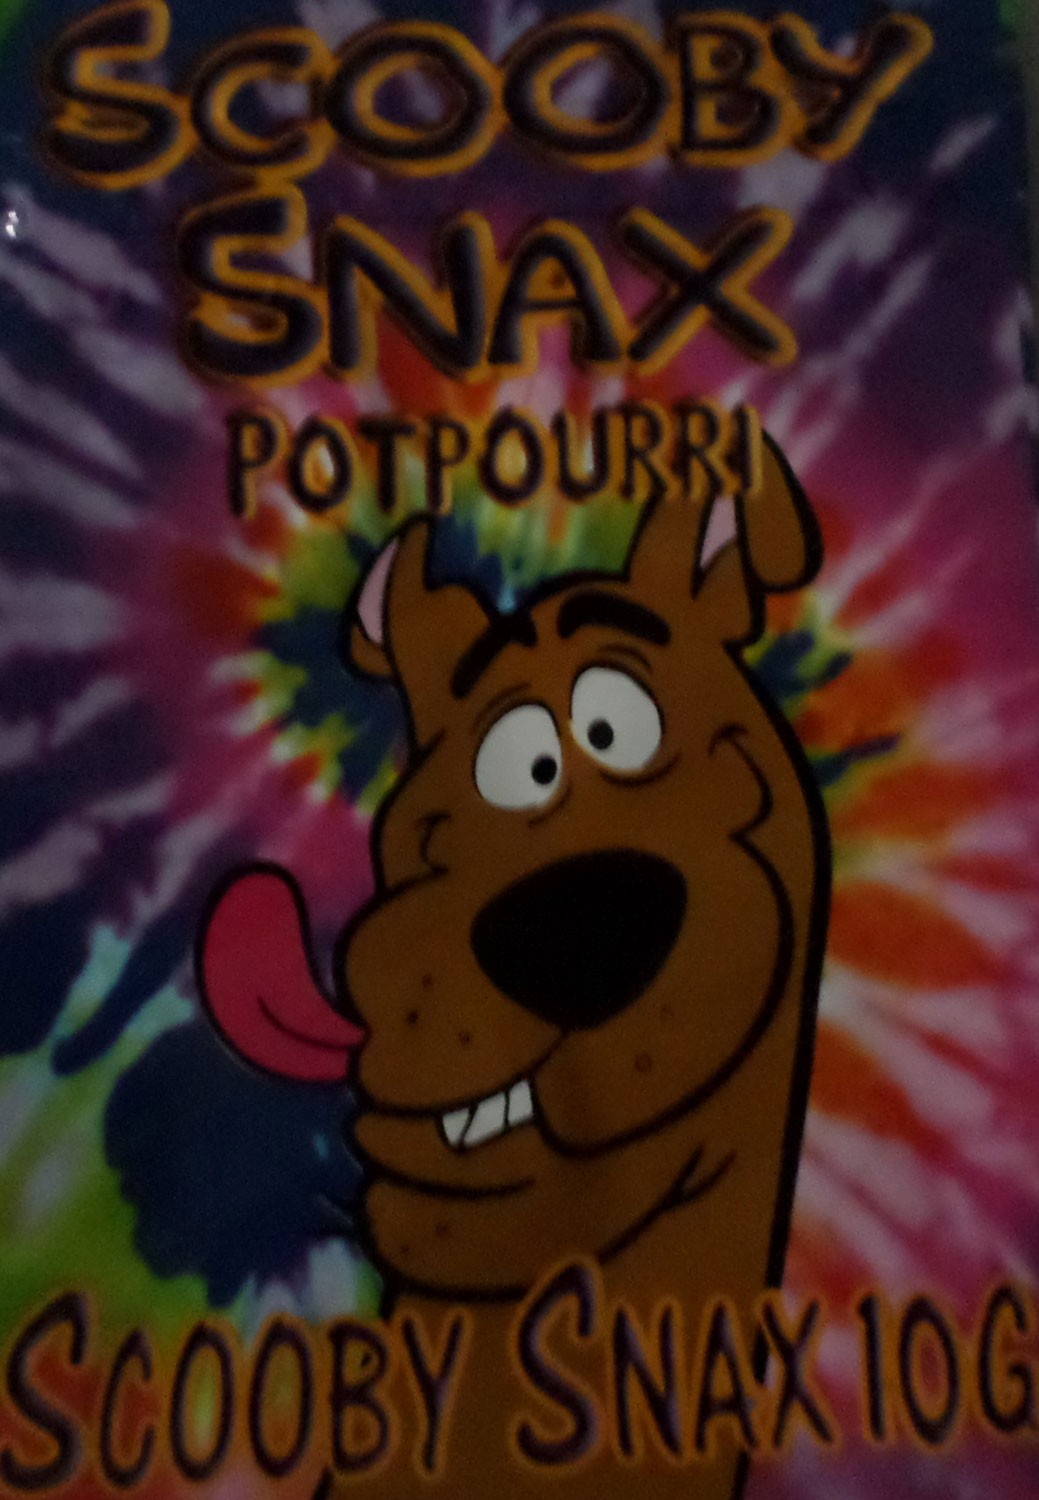 Scooby Snax 10g incense 3x pack